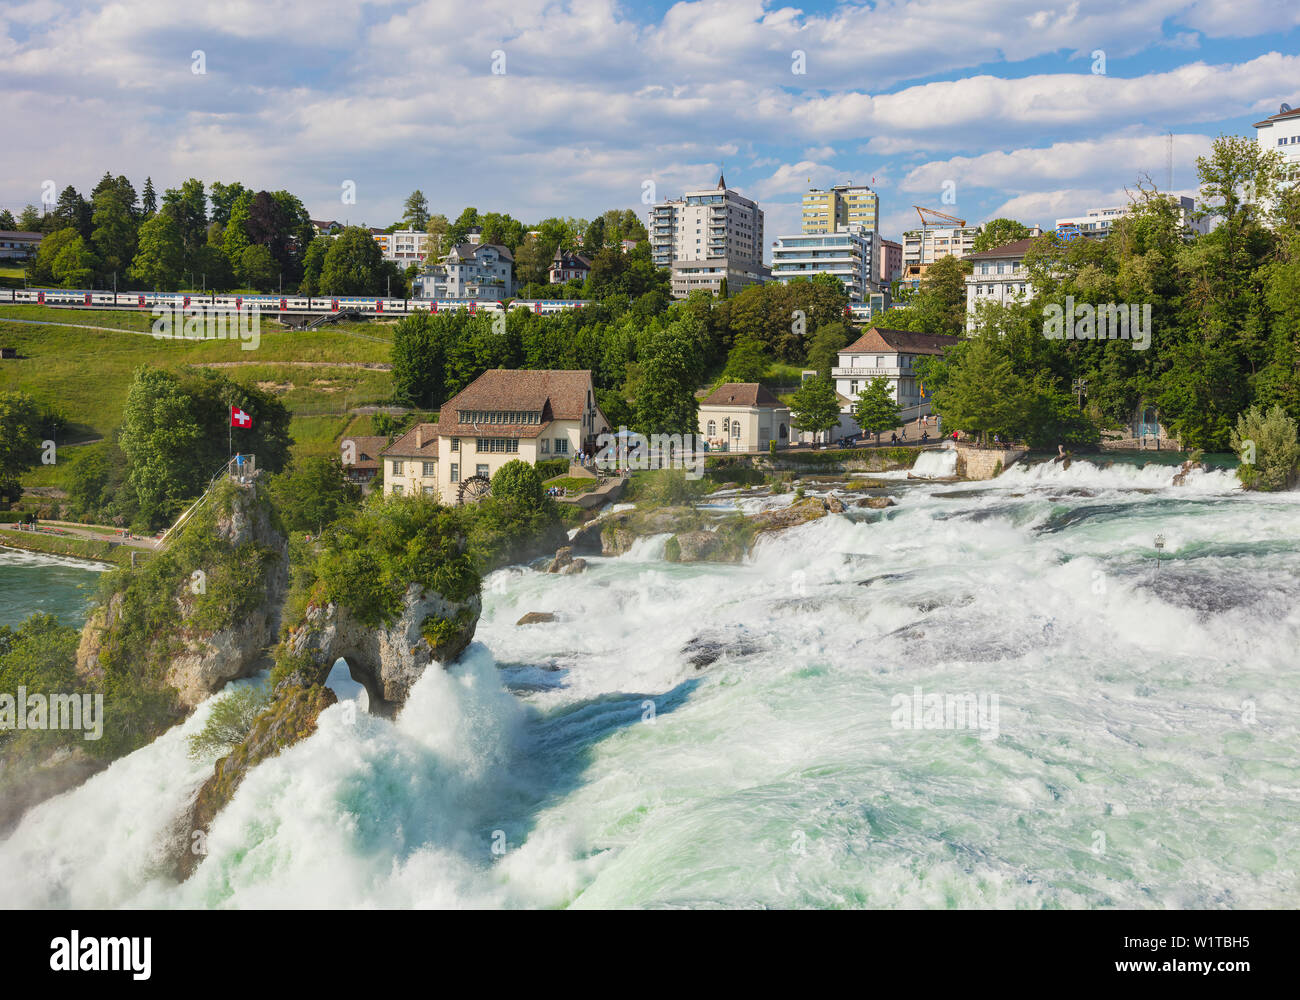 Laufen, Switzerland - June 7, 2019: the Rhine Falls waterfall as seen from the Laufen Castle, buildings of the town of Neuhausen am Rheinfall in the b Stock Photo